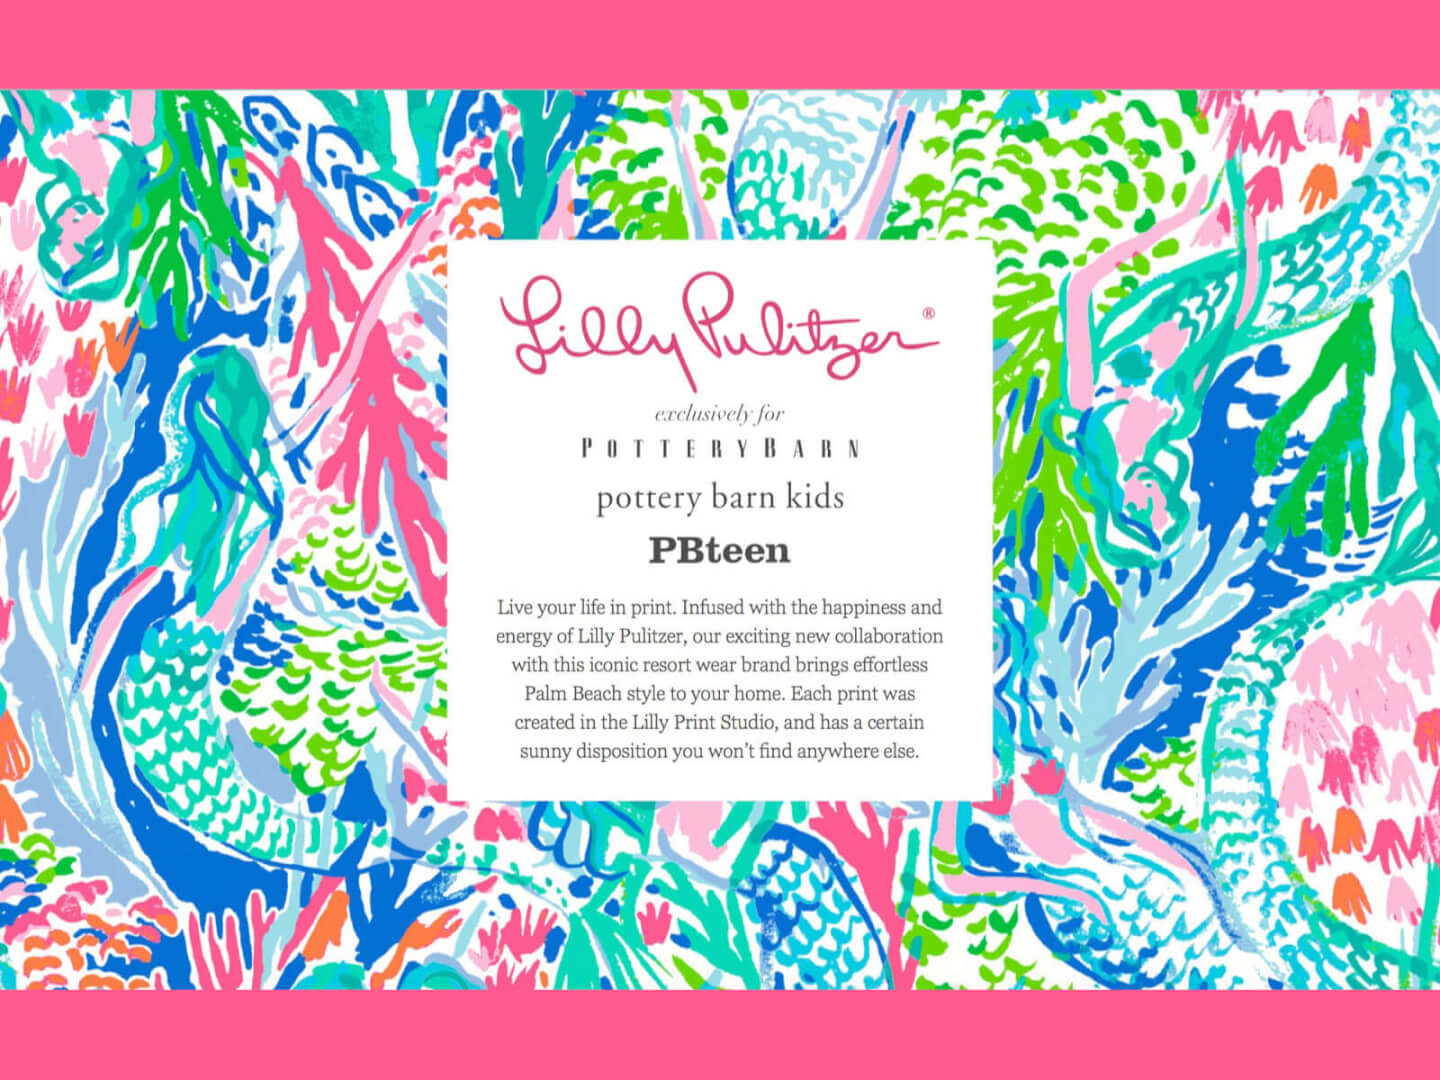 Lilly Pulitzer for Pottery Barn